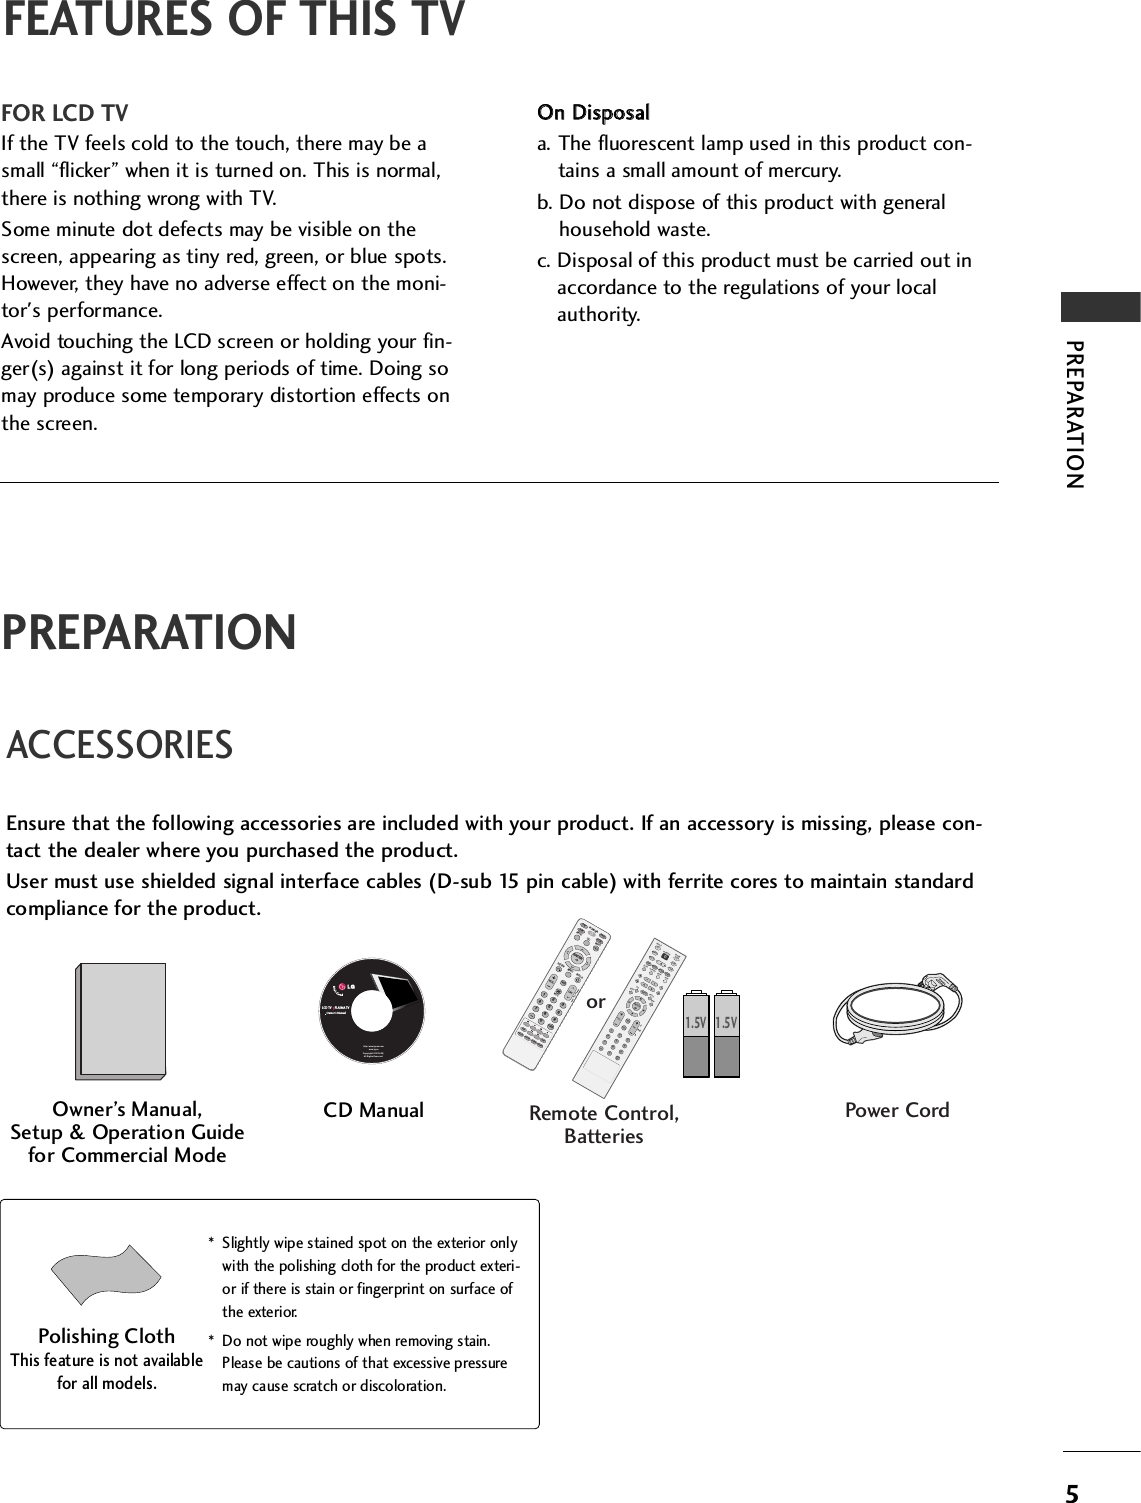 5PREPARATIONACCESSORIESEnsure that the following accessories are included with your product. If an accessory is missing, please con-tact the dealer where you purchased the product. User must use shielded signal interface cables (D-sub 15 pin cable) with ferrite cores to maintain standardcompliance for the product.Owner’s Manual, Setup &amp; Operation Guidefor Commercial ModePower CordFEATURES OF THIS TVFOR LCD TVIf the TV feels cold to the touch, there may be asmall “flicker” when it is turned on. This is normal,there is nothing wrong with TV.Some minute dot defects may be visible on thescreen, appearing as tiny red, green, or blue spots.However, they have no adverse effect on the moni-tor&apos;s performance.Avoid touching the LCD screen or holding your fin-ger(s) against it for long periods of time. Doing somay produce some temporary distortion effects onthe screen.OOnn  DDiissppoossaalla. The fluorescent lamp used in this product con-tains a small amount of mercury.b. Do not dispose of this product with generalhousehold waste.c. Disposal of this product must be carried out inaccordance to the regulations of your localauthority.CD ManualLCD TV    PLASMA TVOwner&apos;s Manualhttp://www.lgusa.comwww.lg.caCopyright© 2007 LGE,All Rights Reserved.* Slightly wipe stained spot on the exterior onlywith the polishing cloth for the product exteri-or if there is stain or fingerprint on surface ofthe exterior.* Do not wipe roughly when removing stain.Please be cautions of that excessive pressuremay cause scratch or discoloration.Polishing ClothThis feature is not availablefor all models.ENTER TVTVINPUT  PUT MODEDVDMULTIXITEZ SOUNDINFOSWAPEZ PICCHSAPCCRATIOMENUVCRPOWERPIPPIP CH - PIP CH +PIP INPUTENTER TVTVINPUT  INPUT MODEDVDMULTIEXITVOLEZ SOUNDINFOSWAPEZ PICTIMERMUTECHSAPCCRATIOMENUVCRPOWER1234567890FLASHBACKPIPPIP CH - PIP CH +PIP INPUTPAGEPAGE1.5V 1.5VMUTERETURNTIMERTVPOWERRATIOCCENTER VOLCH1234567809FLASHBKVCRDVDINPUTMENUINFOiSTBPAGEPIP SAPPIP CH- PIP CH+PIP SWAPPIP INPUTorRemote Control,BatteriesPREPARATION